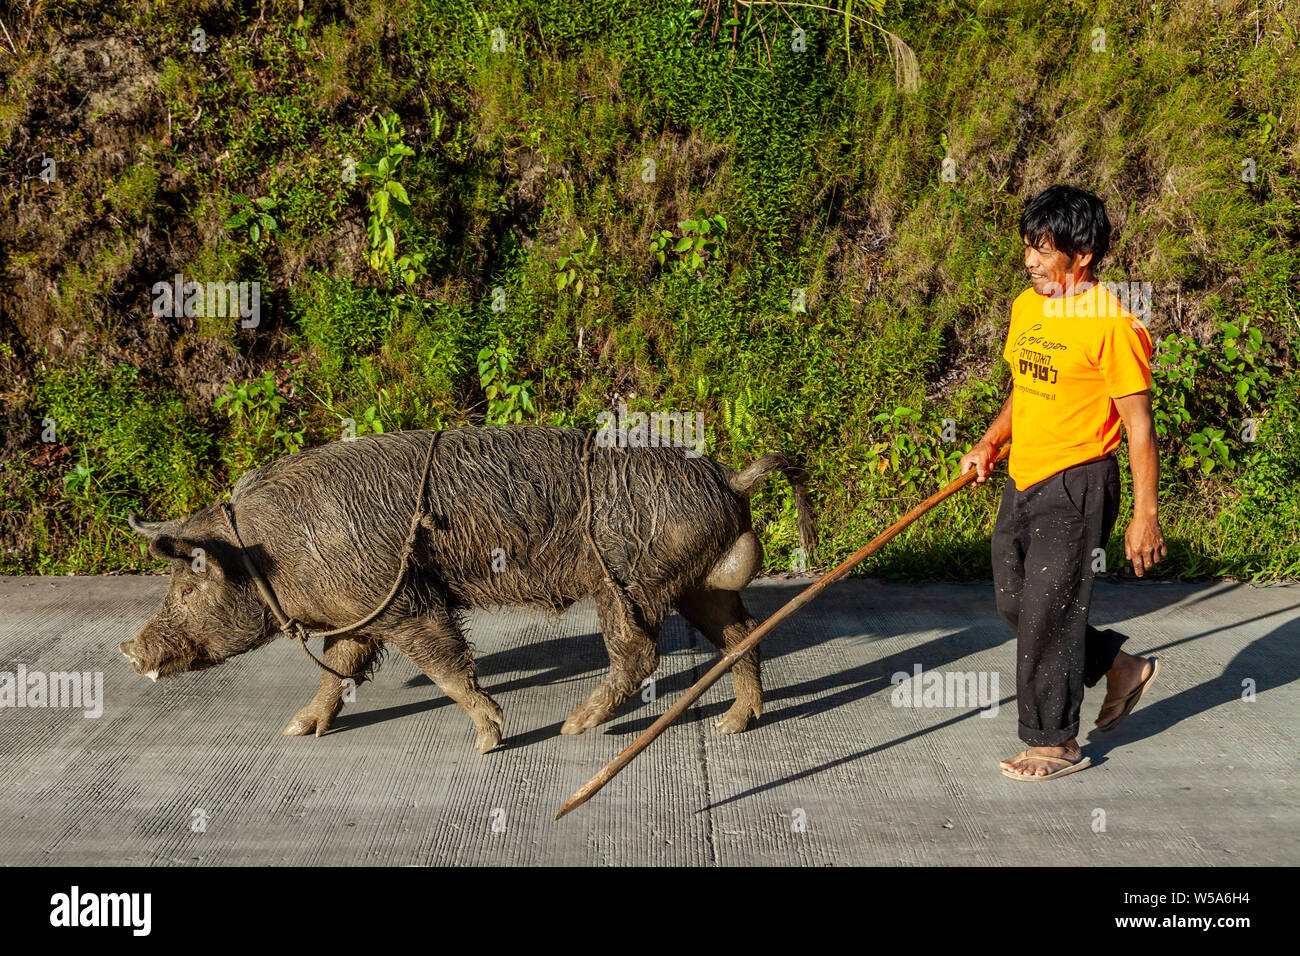 A Man With A Stick Walking With His Pig, Banaue, Luzon, The Philippines Stock Photo